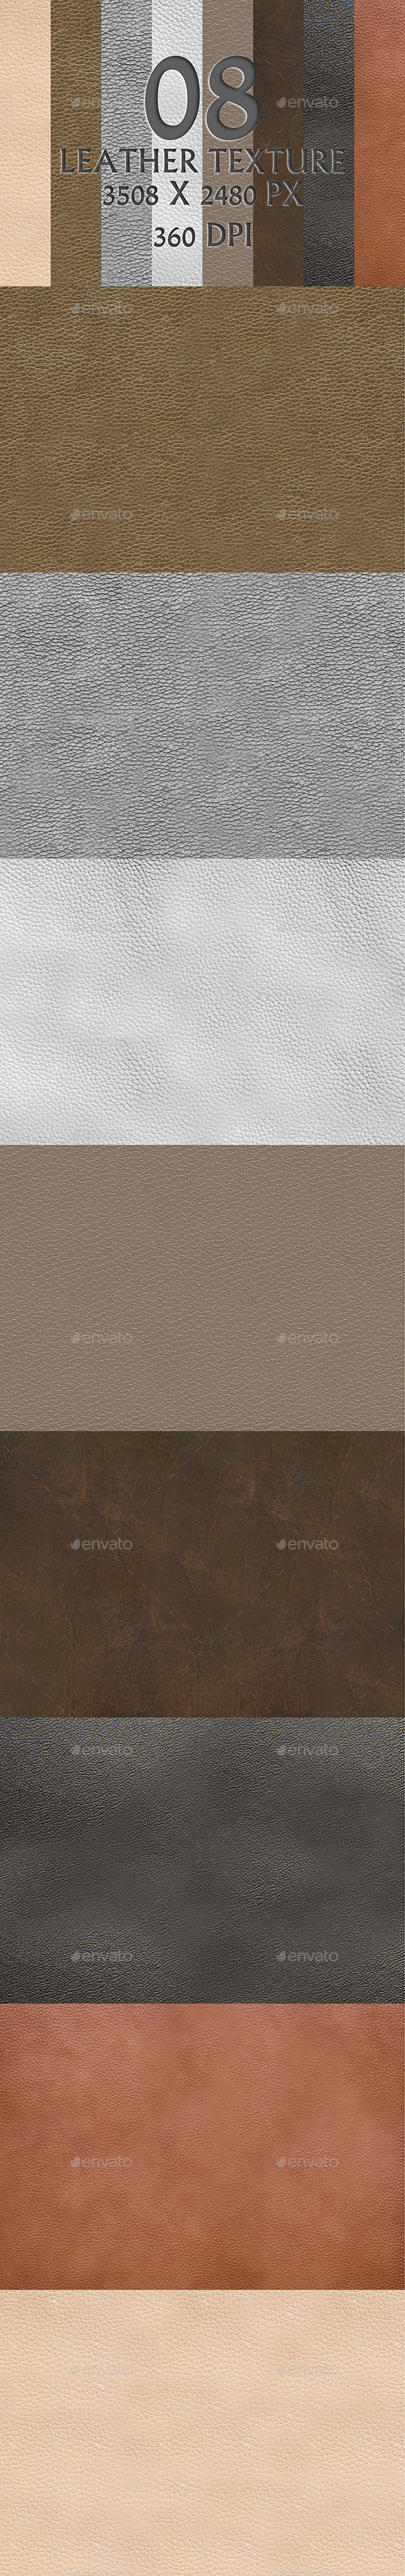 8 Leather Texture Background